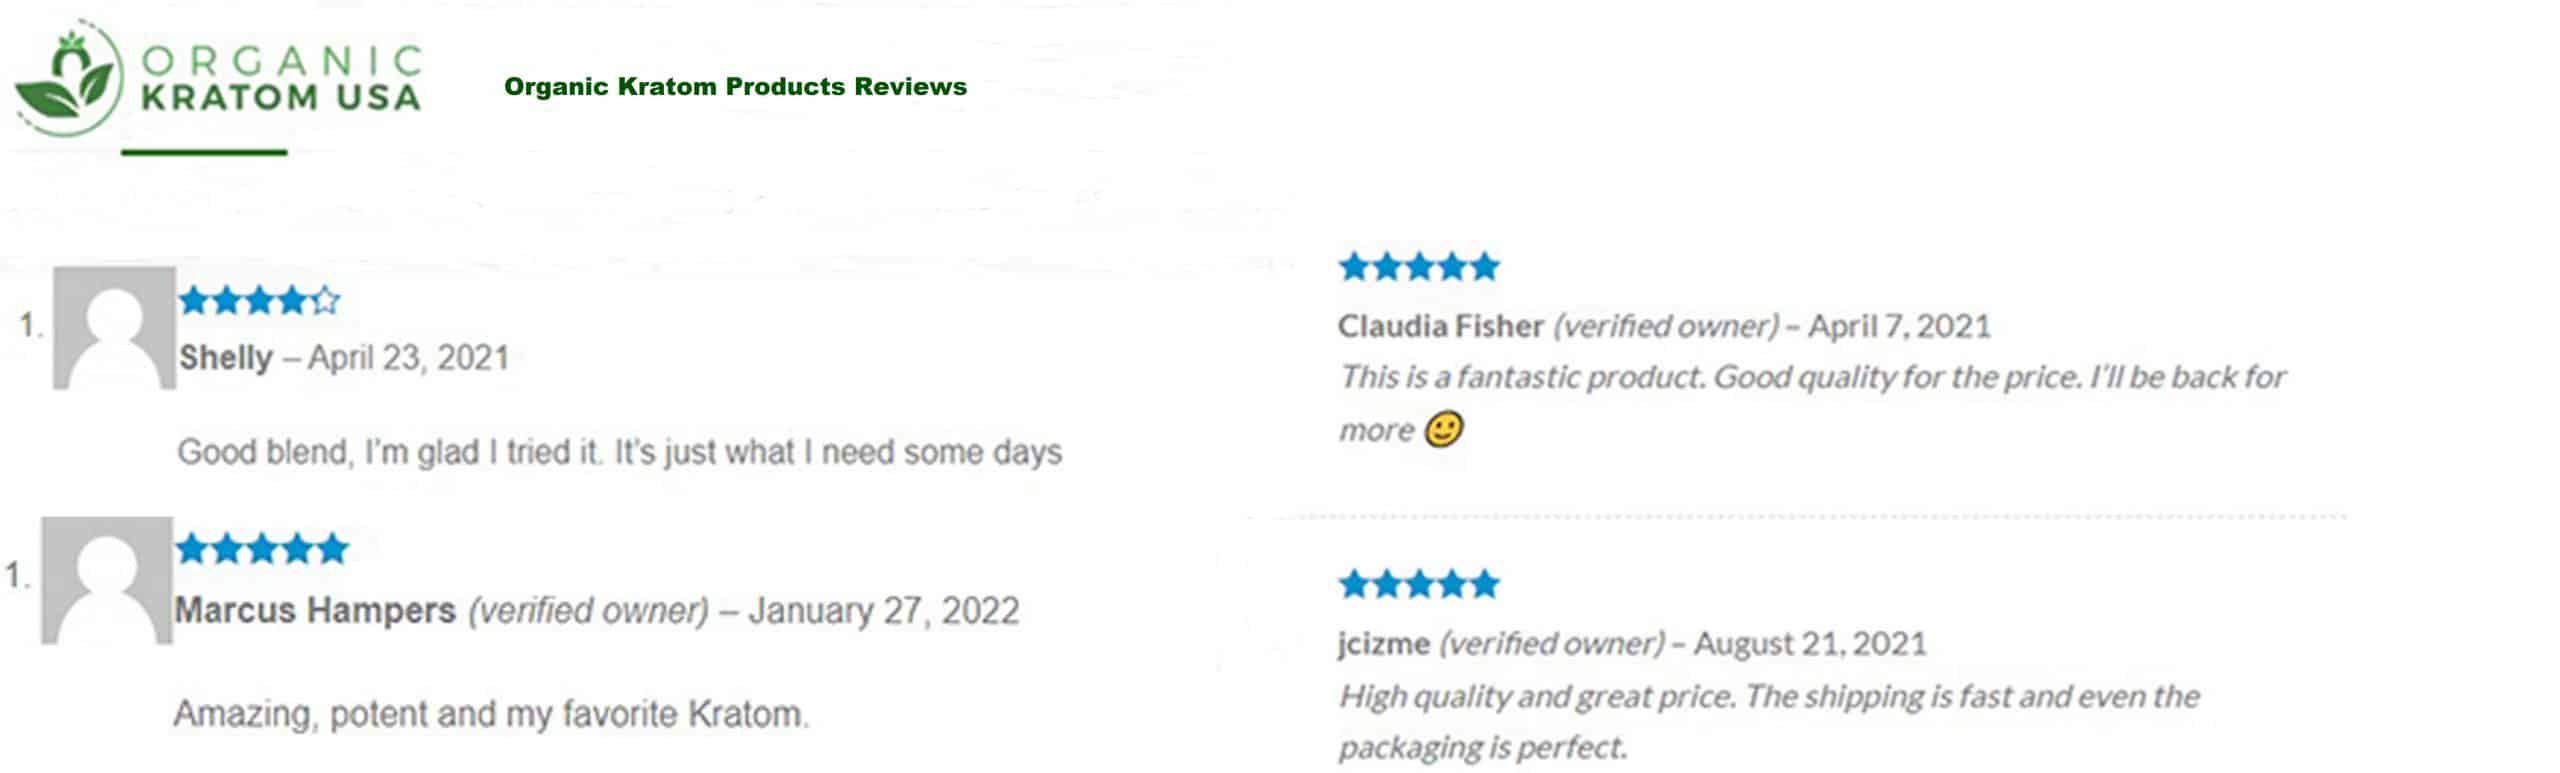 image of organic kratom products reviews